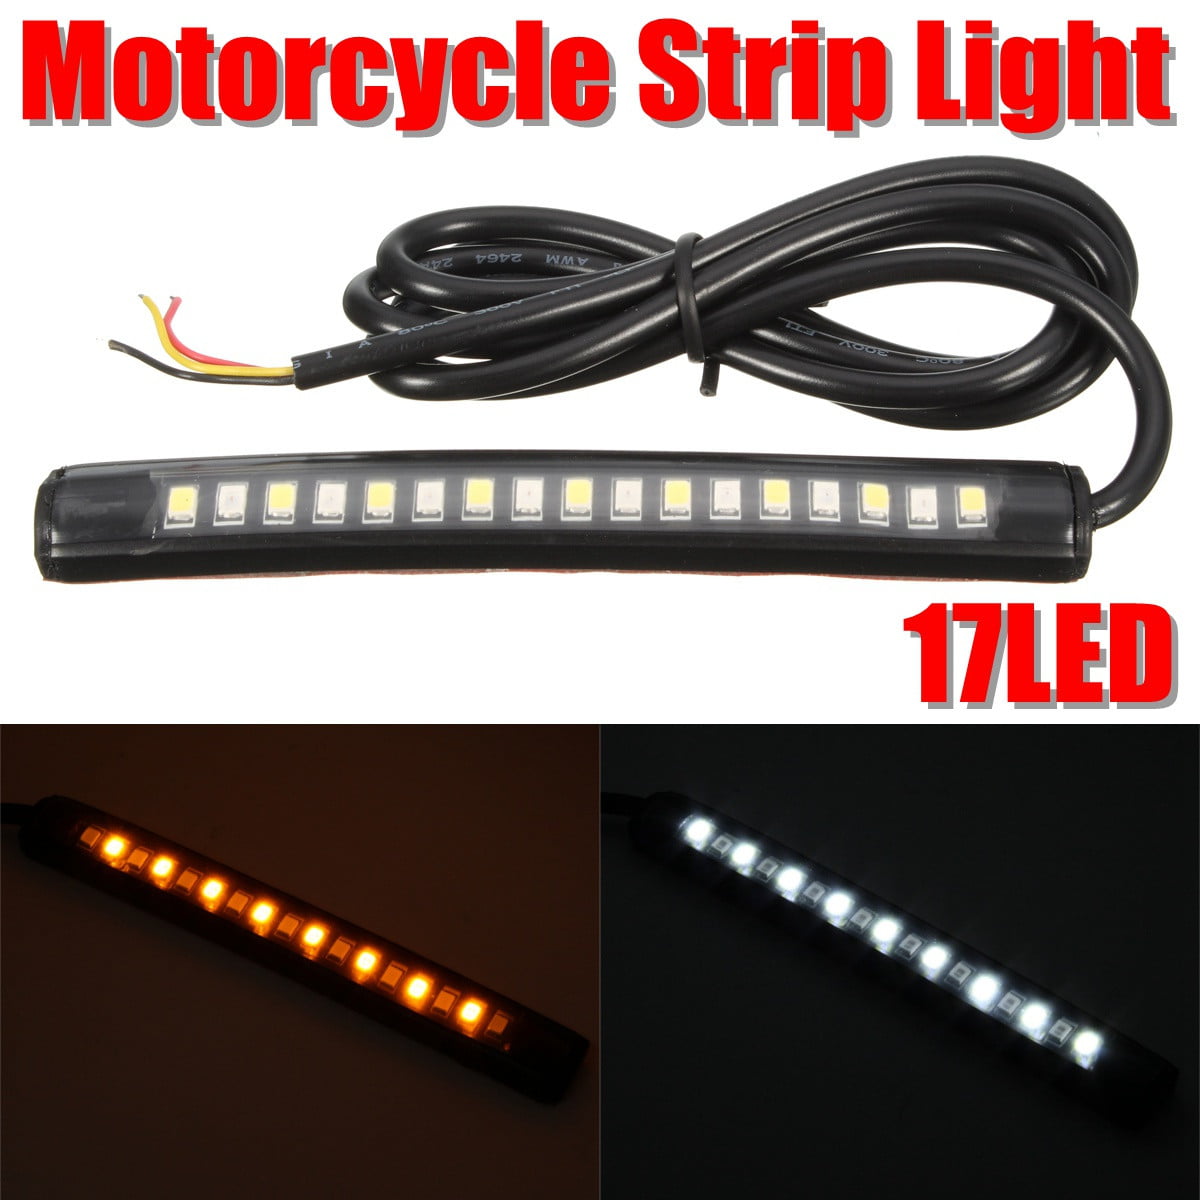 Alpena Flex Led Motorcycle Wiring Diagram from i5.walmartimages.com